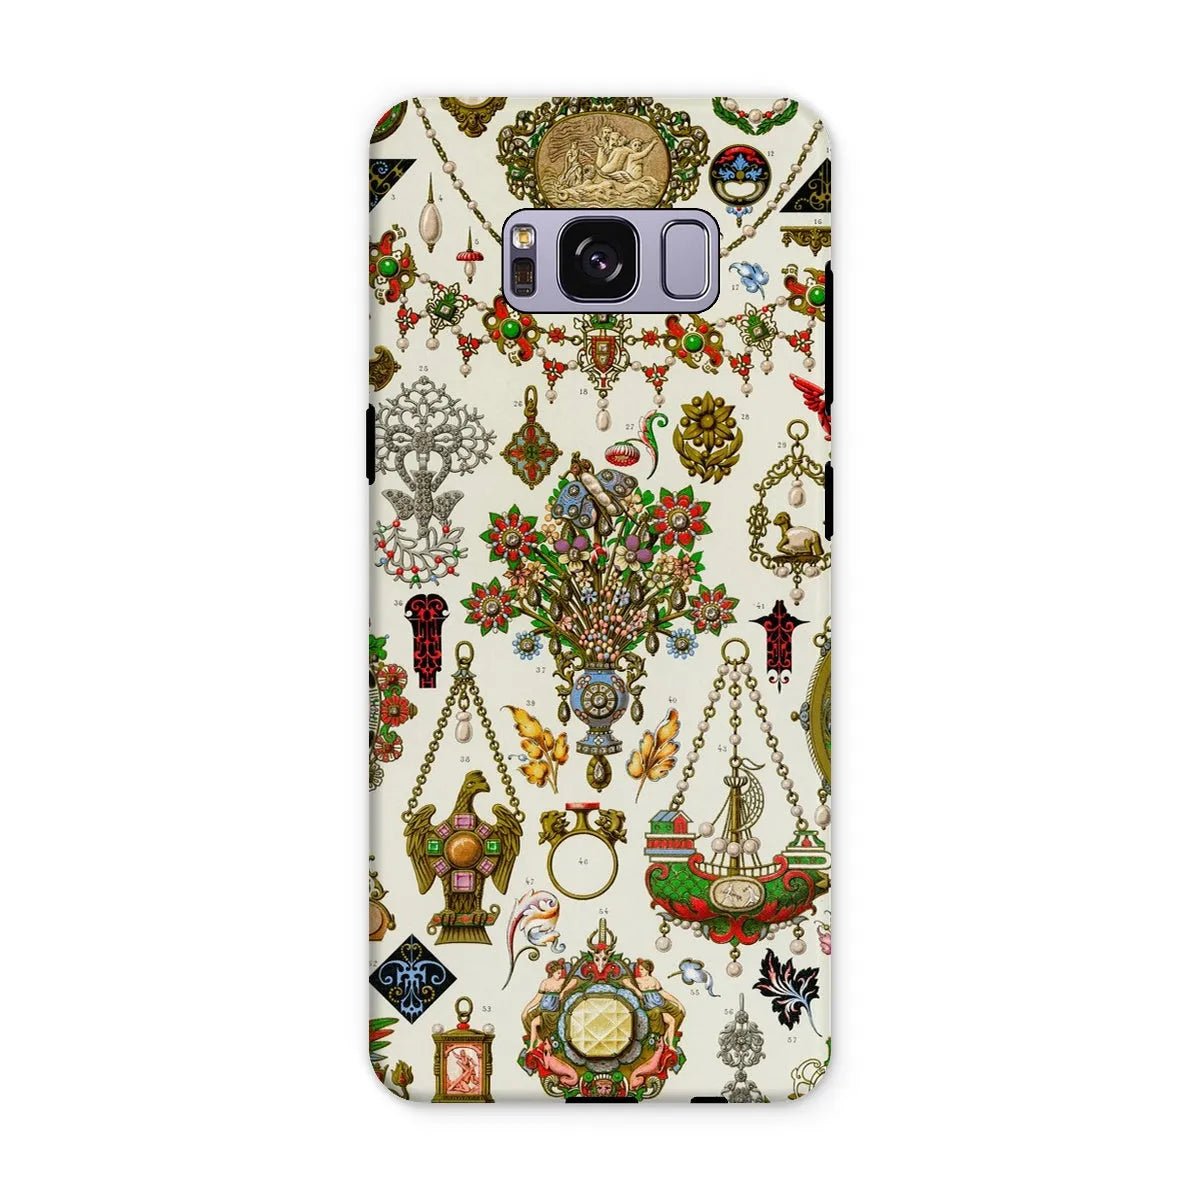 French Jewelry By Auguste Racinet Tough Phone Case - Samsung Galaxy S8 Plus / Matte - Mobile Phone Cases - Aesthetic Art